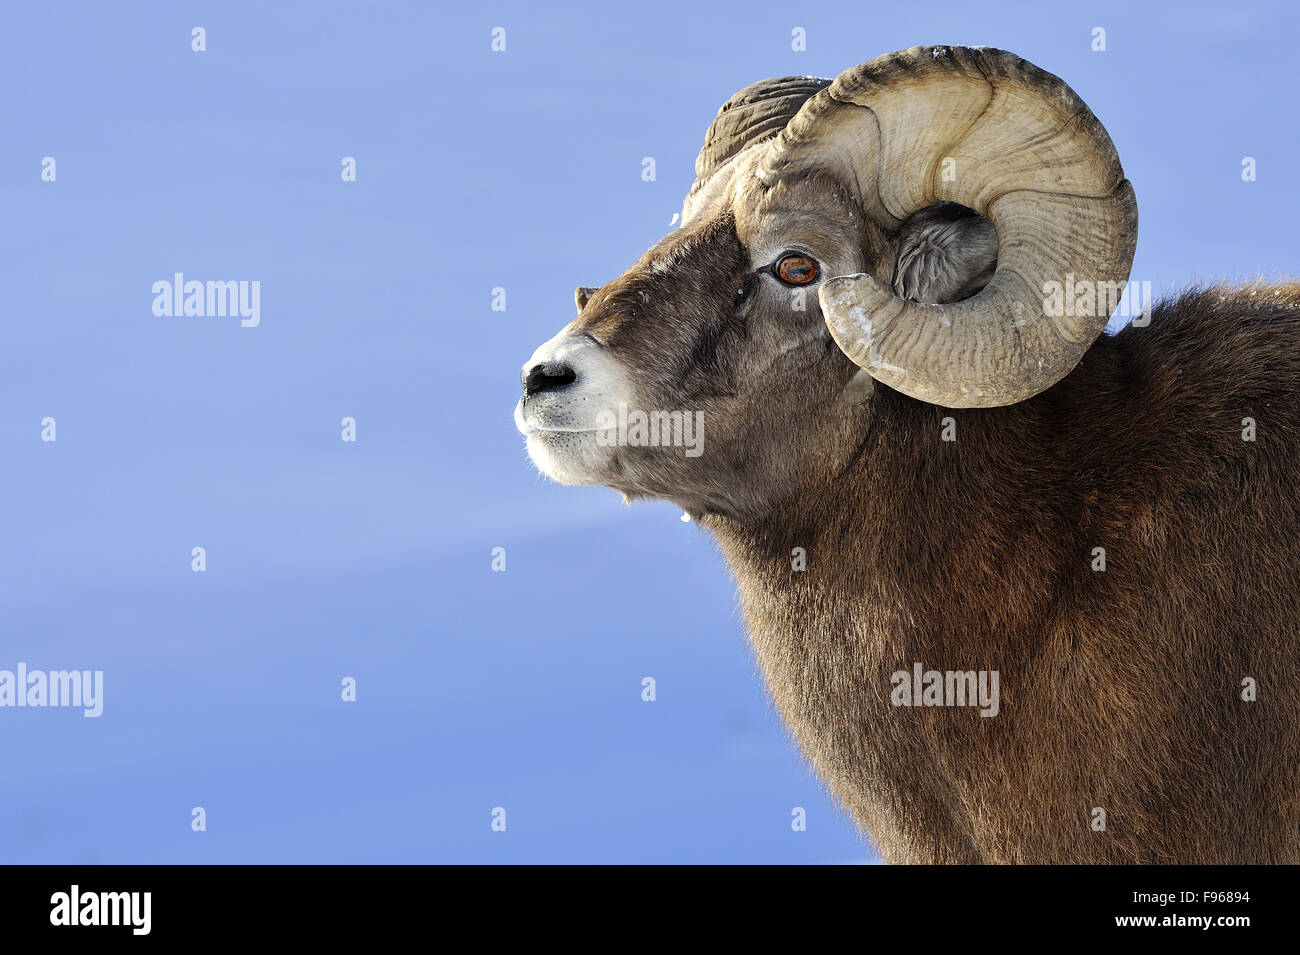 A portrait image of a rocky mountain bighorn sheep  Orvis canadensis, standing against a blue sky background. Stock Photo